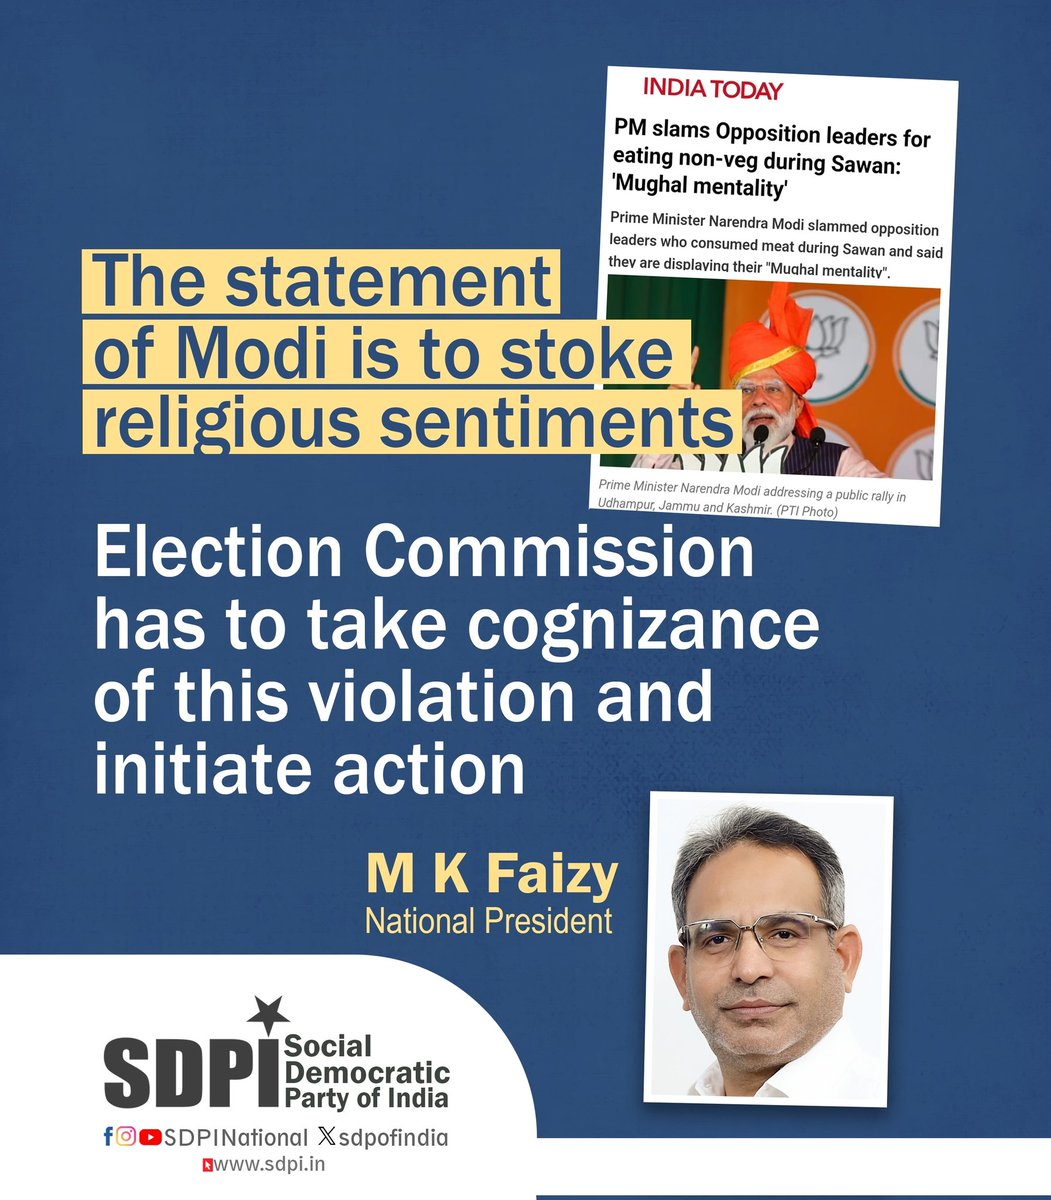 This statement of Modi is to stoke religious sentiments which is in violation of the MCC. Election Commission has to take cognizance of this violation and initiate action